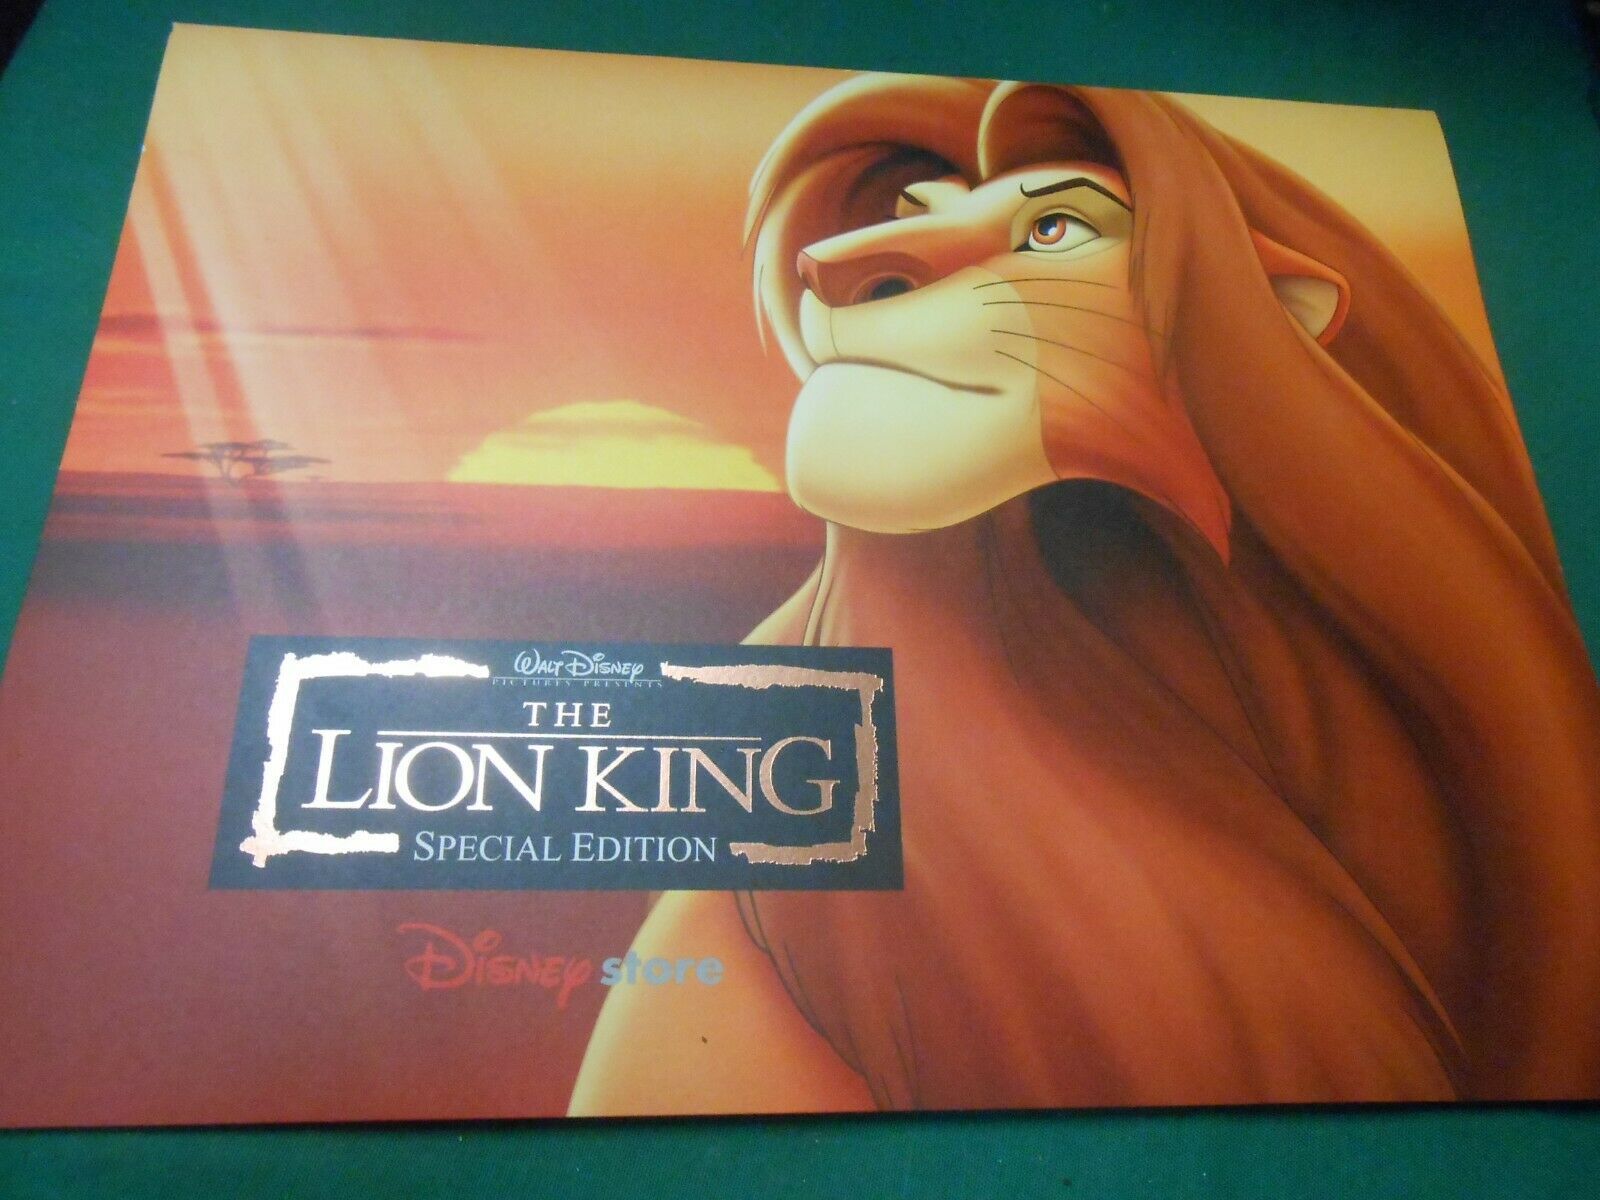 Primary image for  Great DISNEY Litho Portfolio 14"x11" THE LION KING Special Edition....4 Lithos